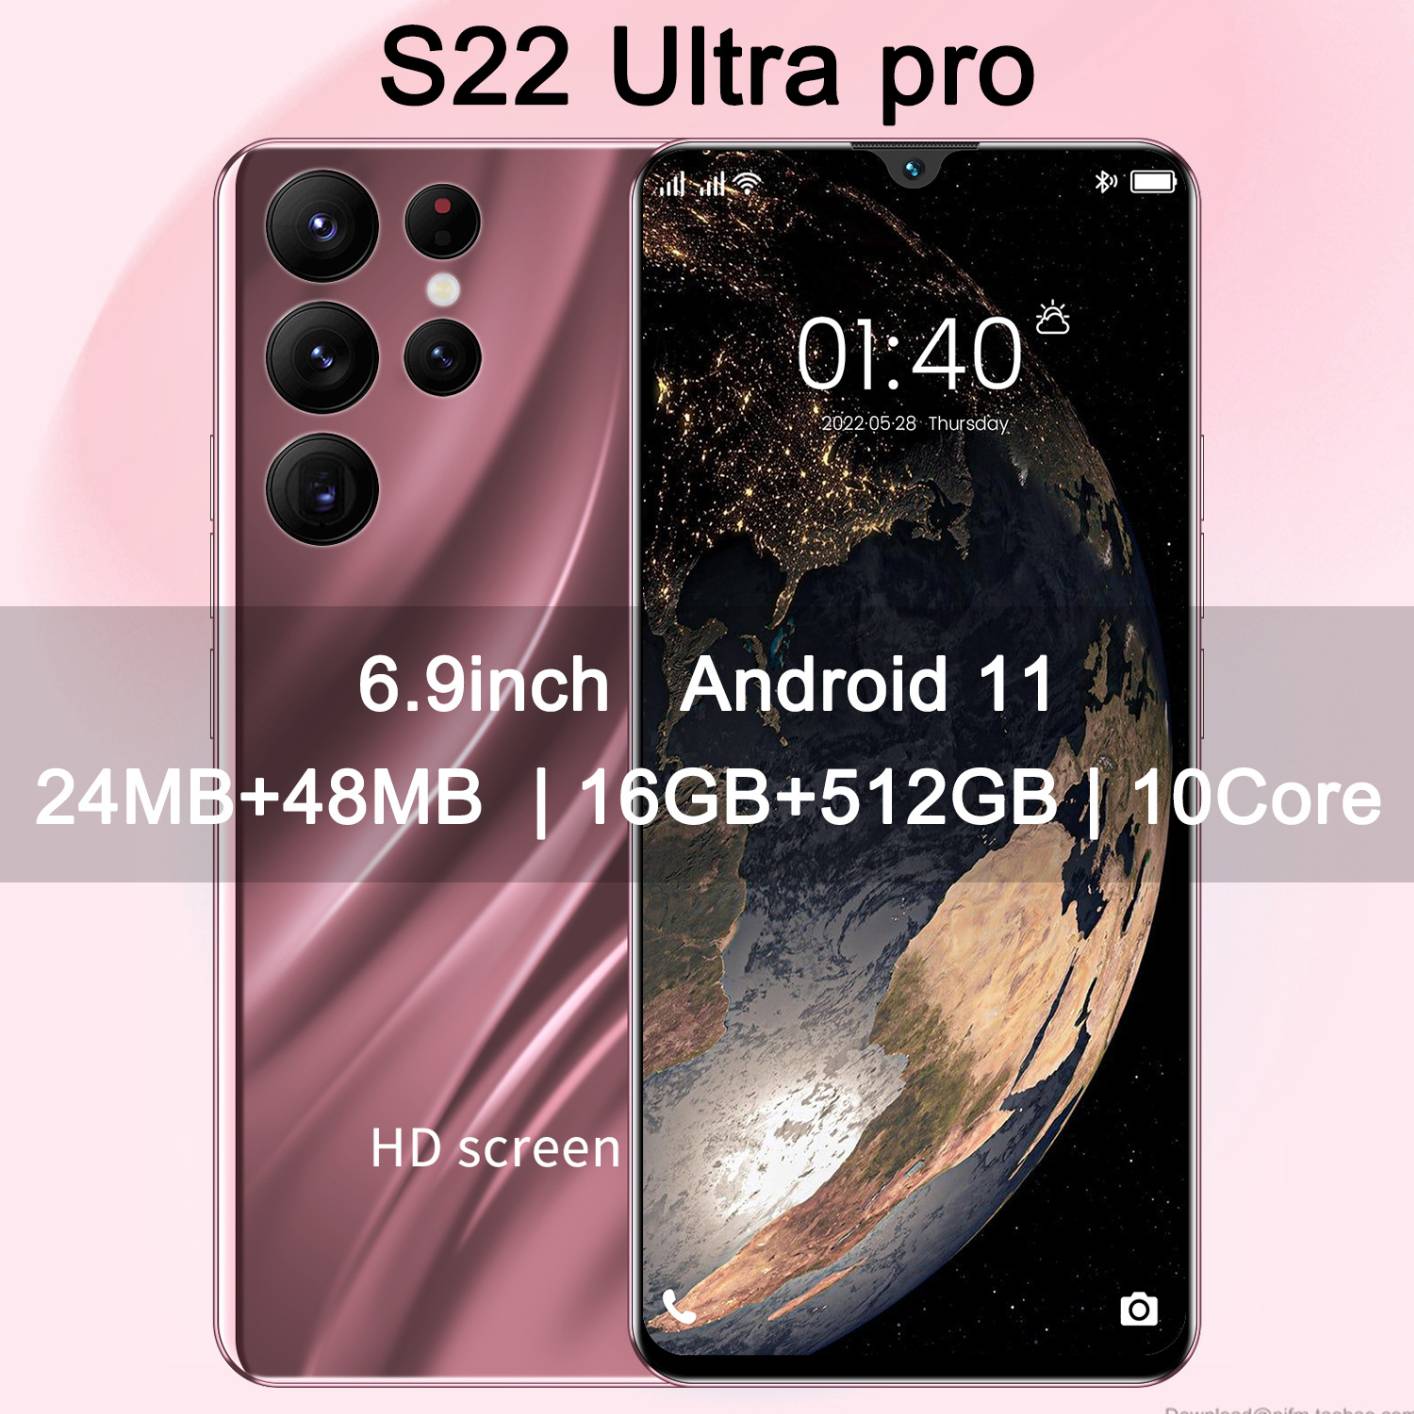 Global Version S22 Ultra pro Smartphone 6.9 inch 16GB+512GB 24+48MP Camera Android 11.0 11 Core Mobile Phone